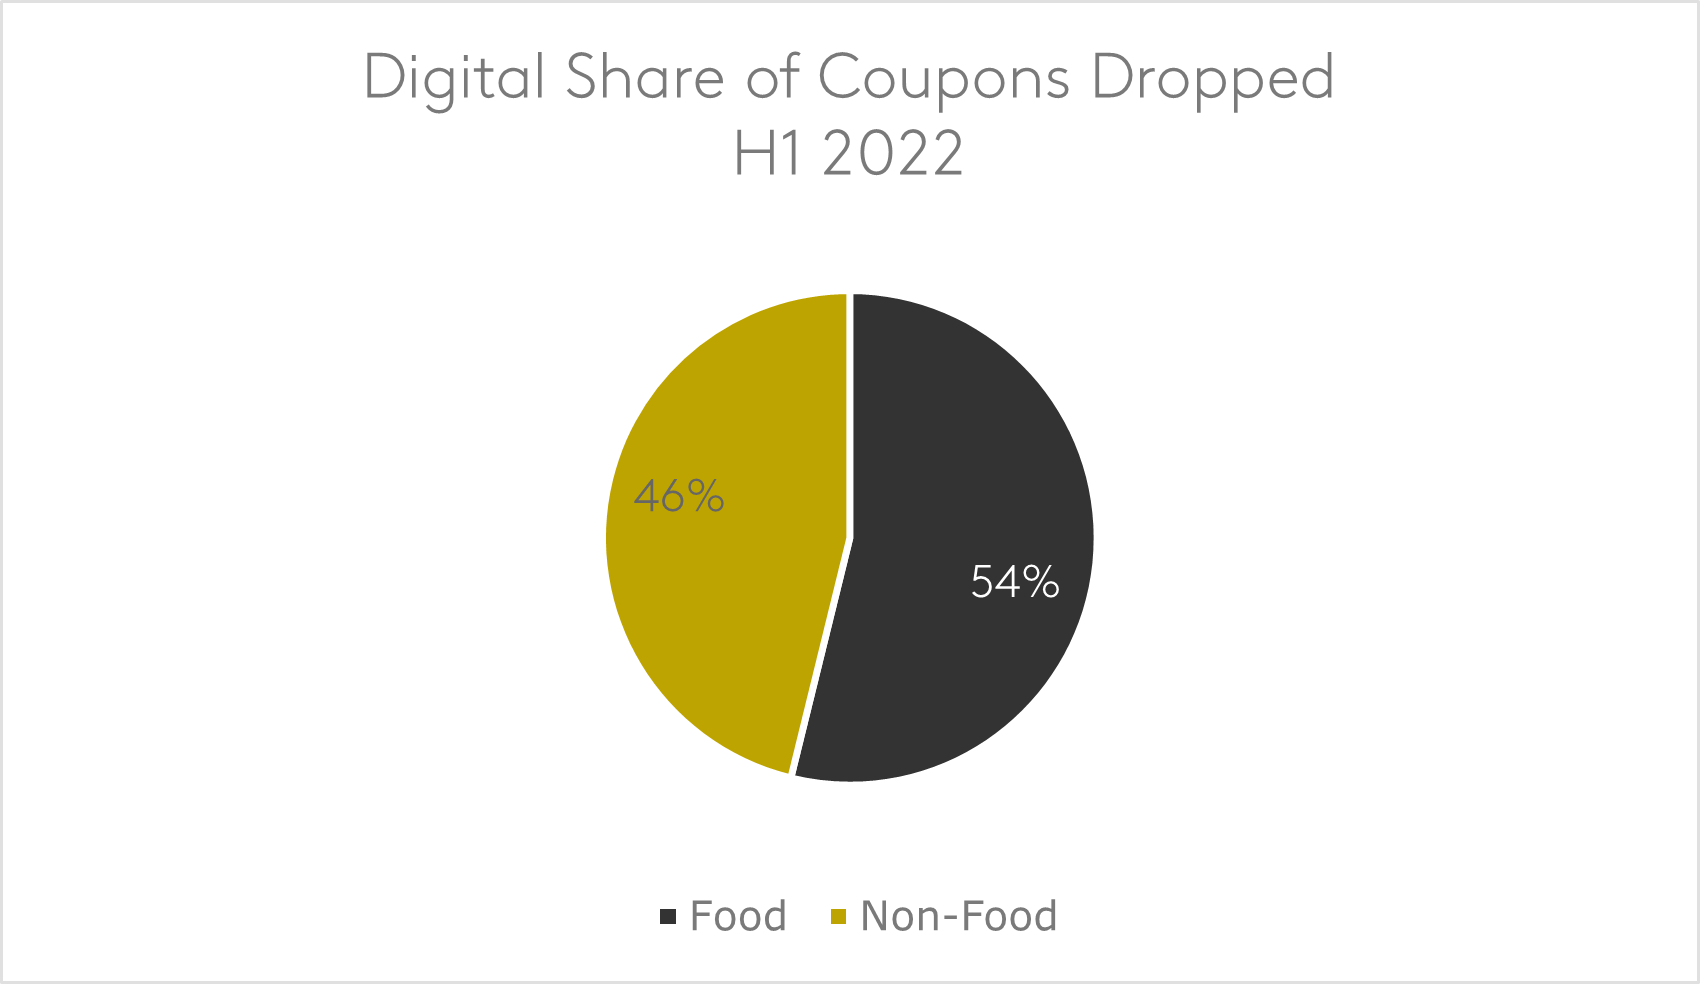 Digital share of coupons dropped first half 2022